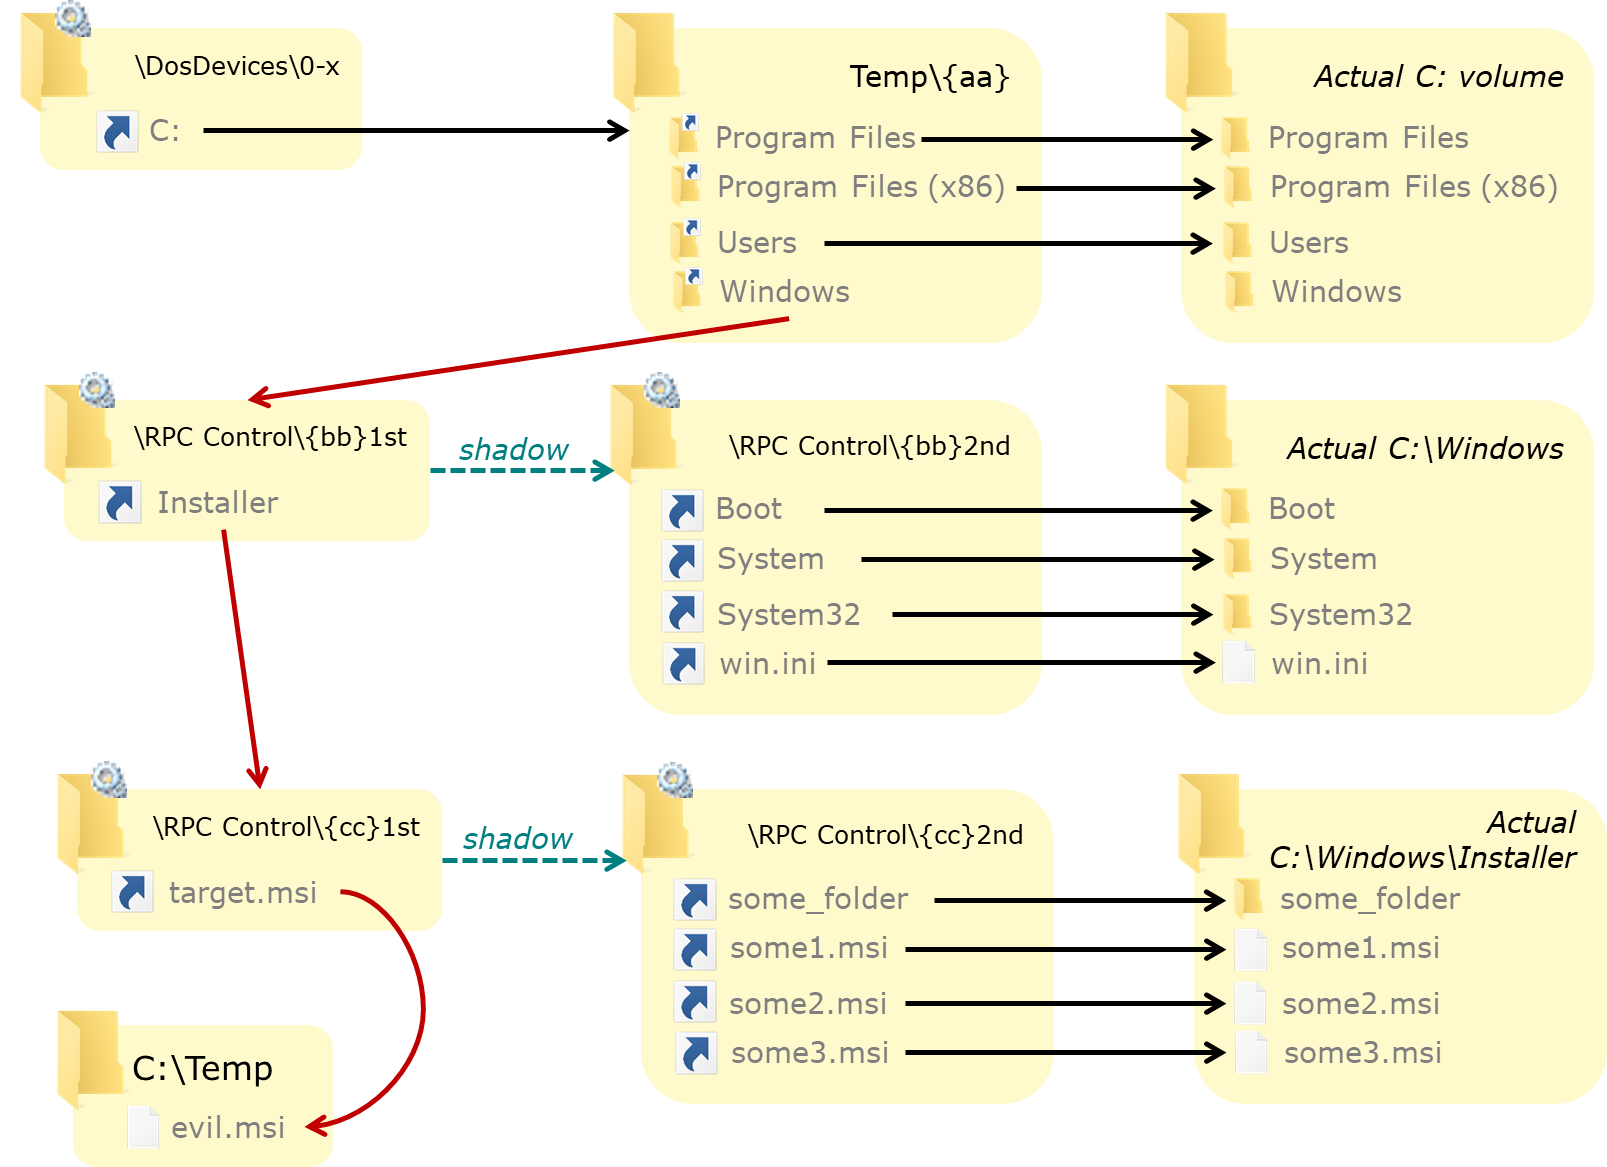 Schema showing the chain of mountpoints, object directories and symlinks used for the redirection